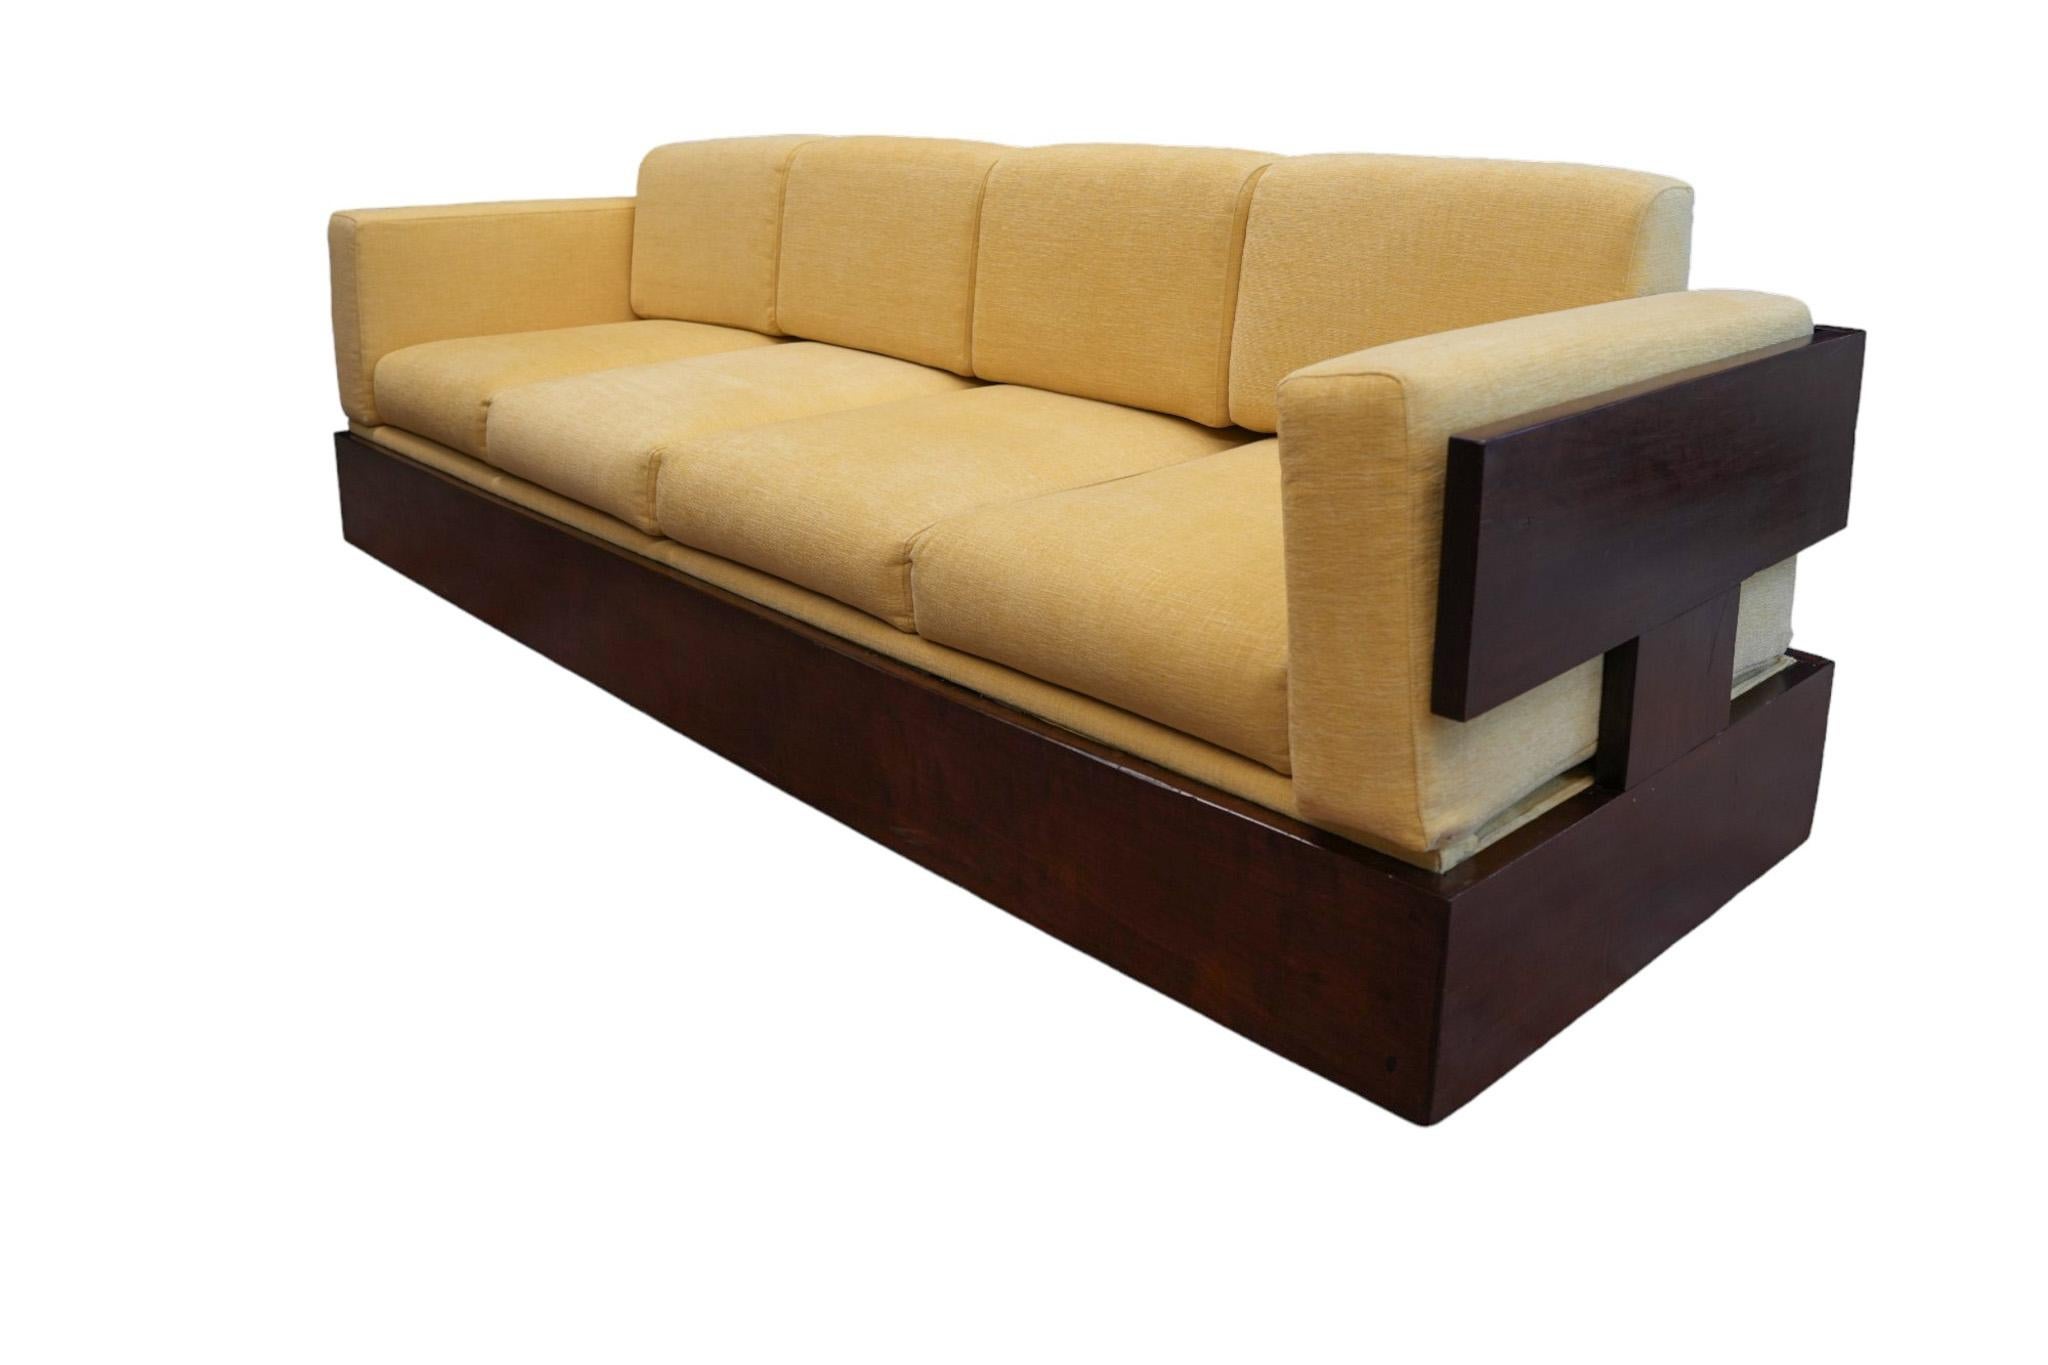 Hand-Carved Brazilian Modern Sofa in Hardwood and Yellow Chenille by Celina, Brazil, c. 1960 For Sale